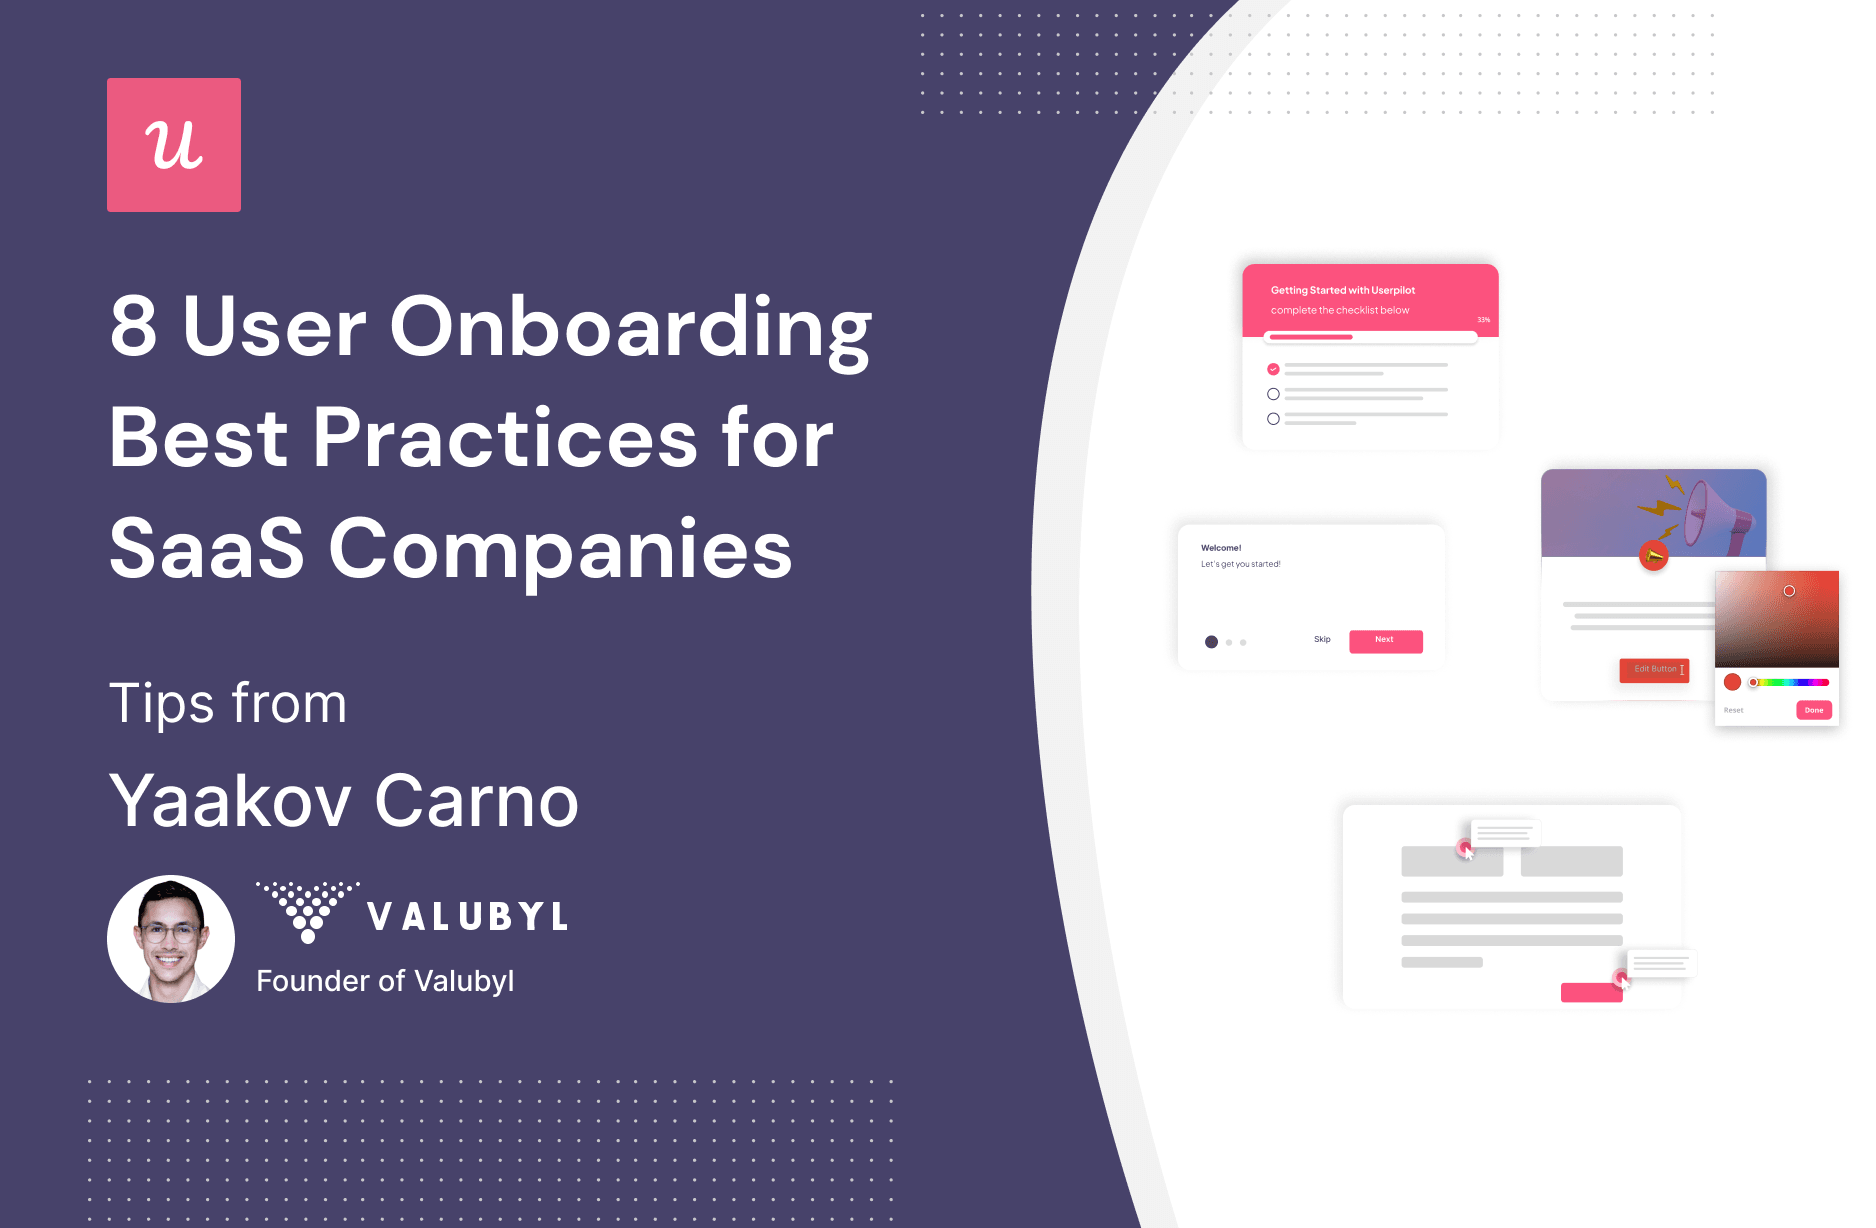 8 User Onboarding Best Practices for SaaS Companies by Yaakov Carno cover